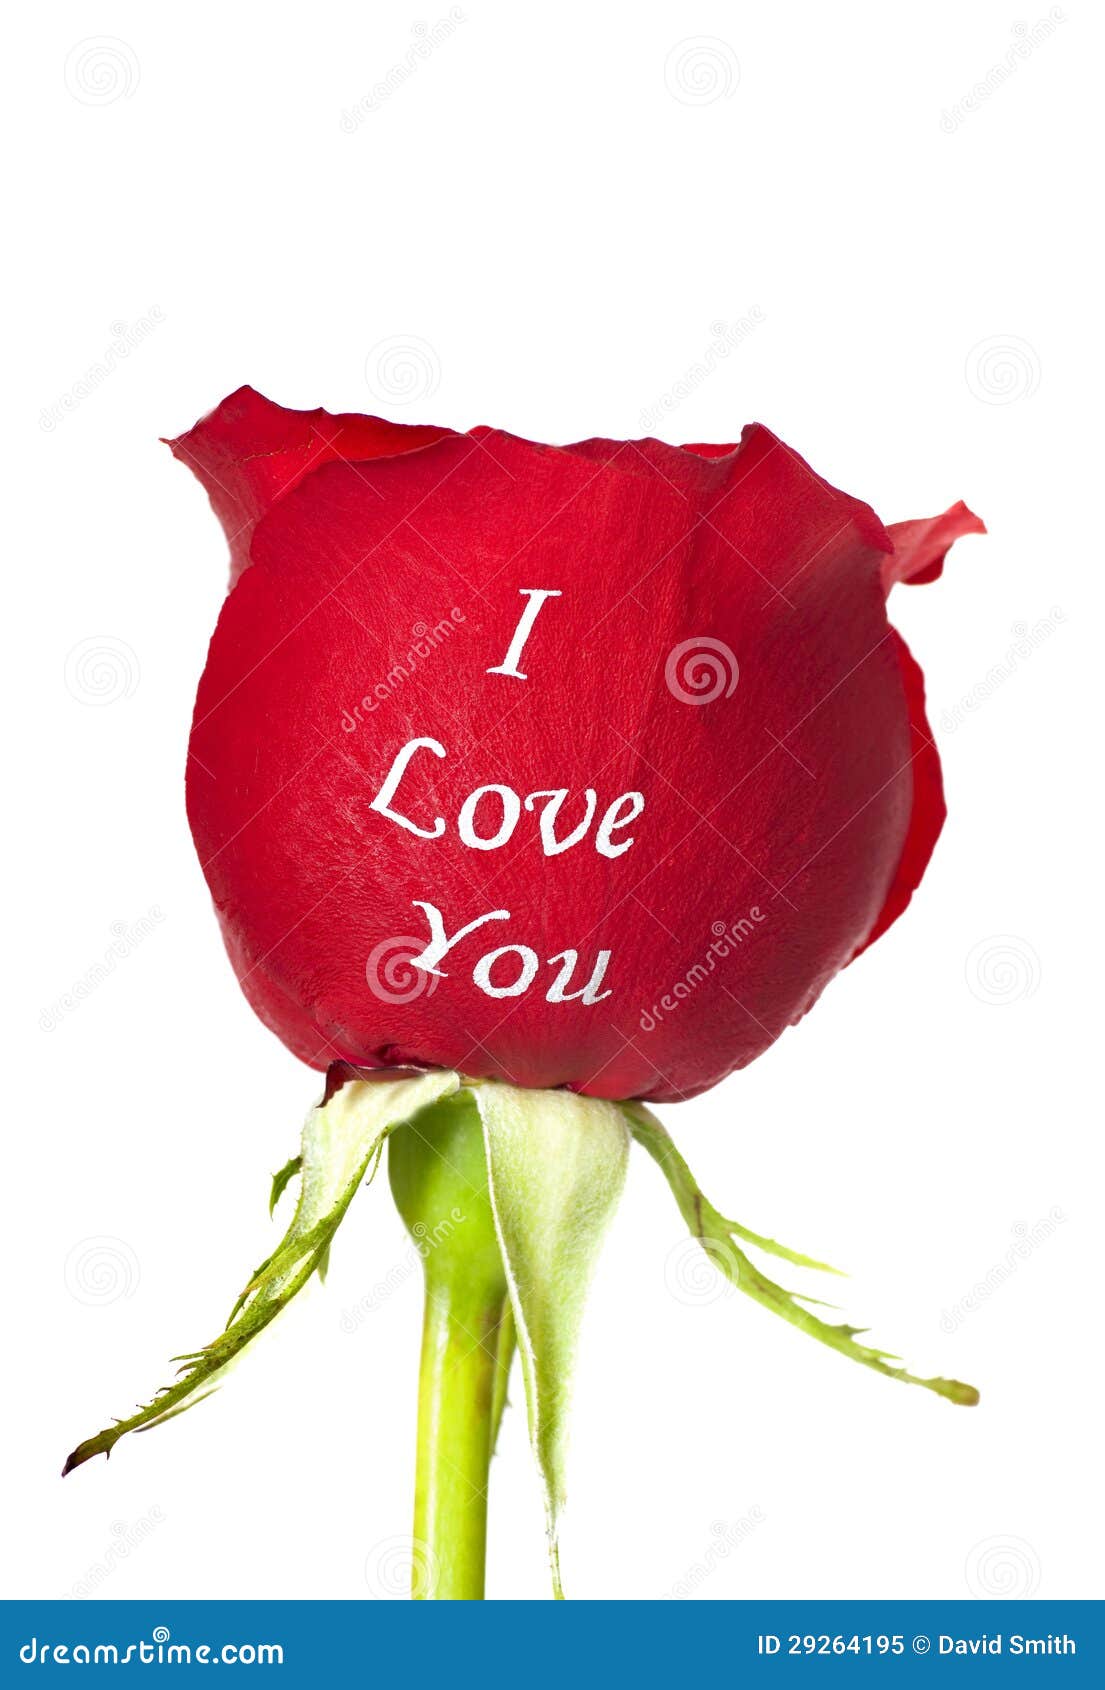 Red Rose with I Love You Printed on it Stock Image - Image of gift ...